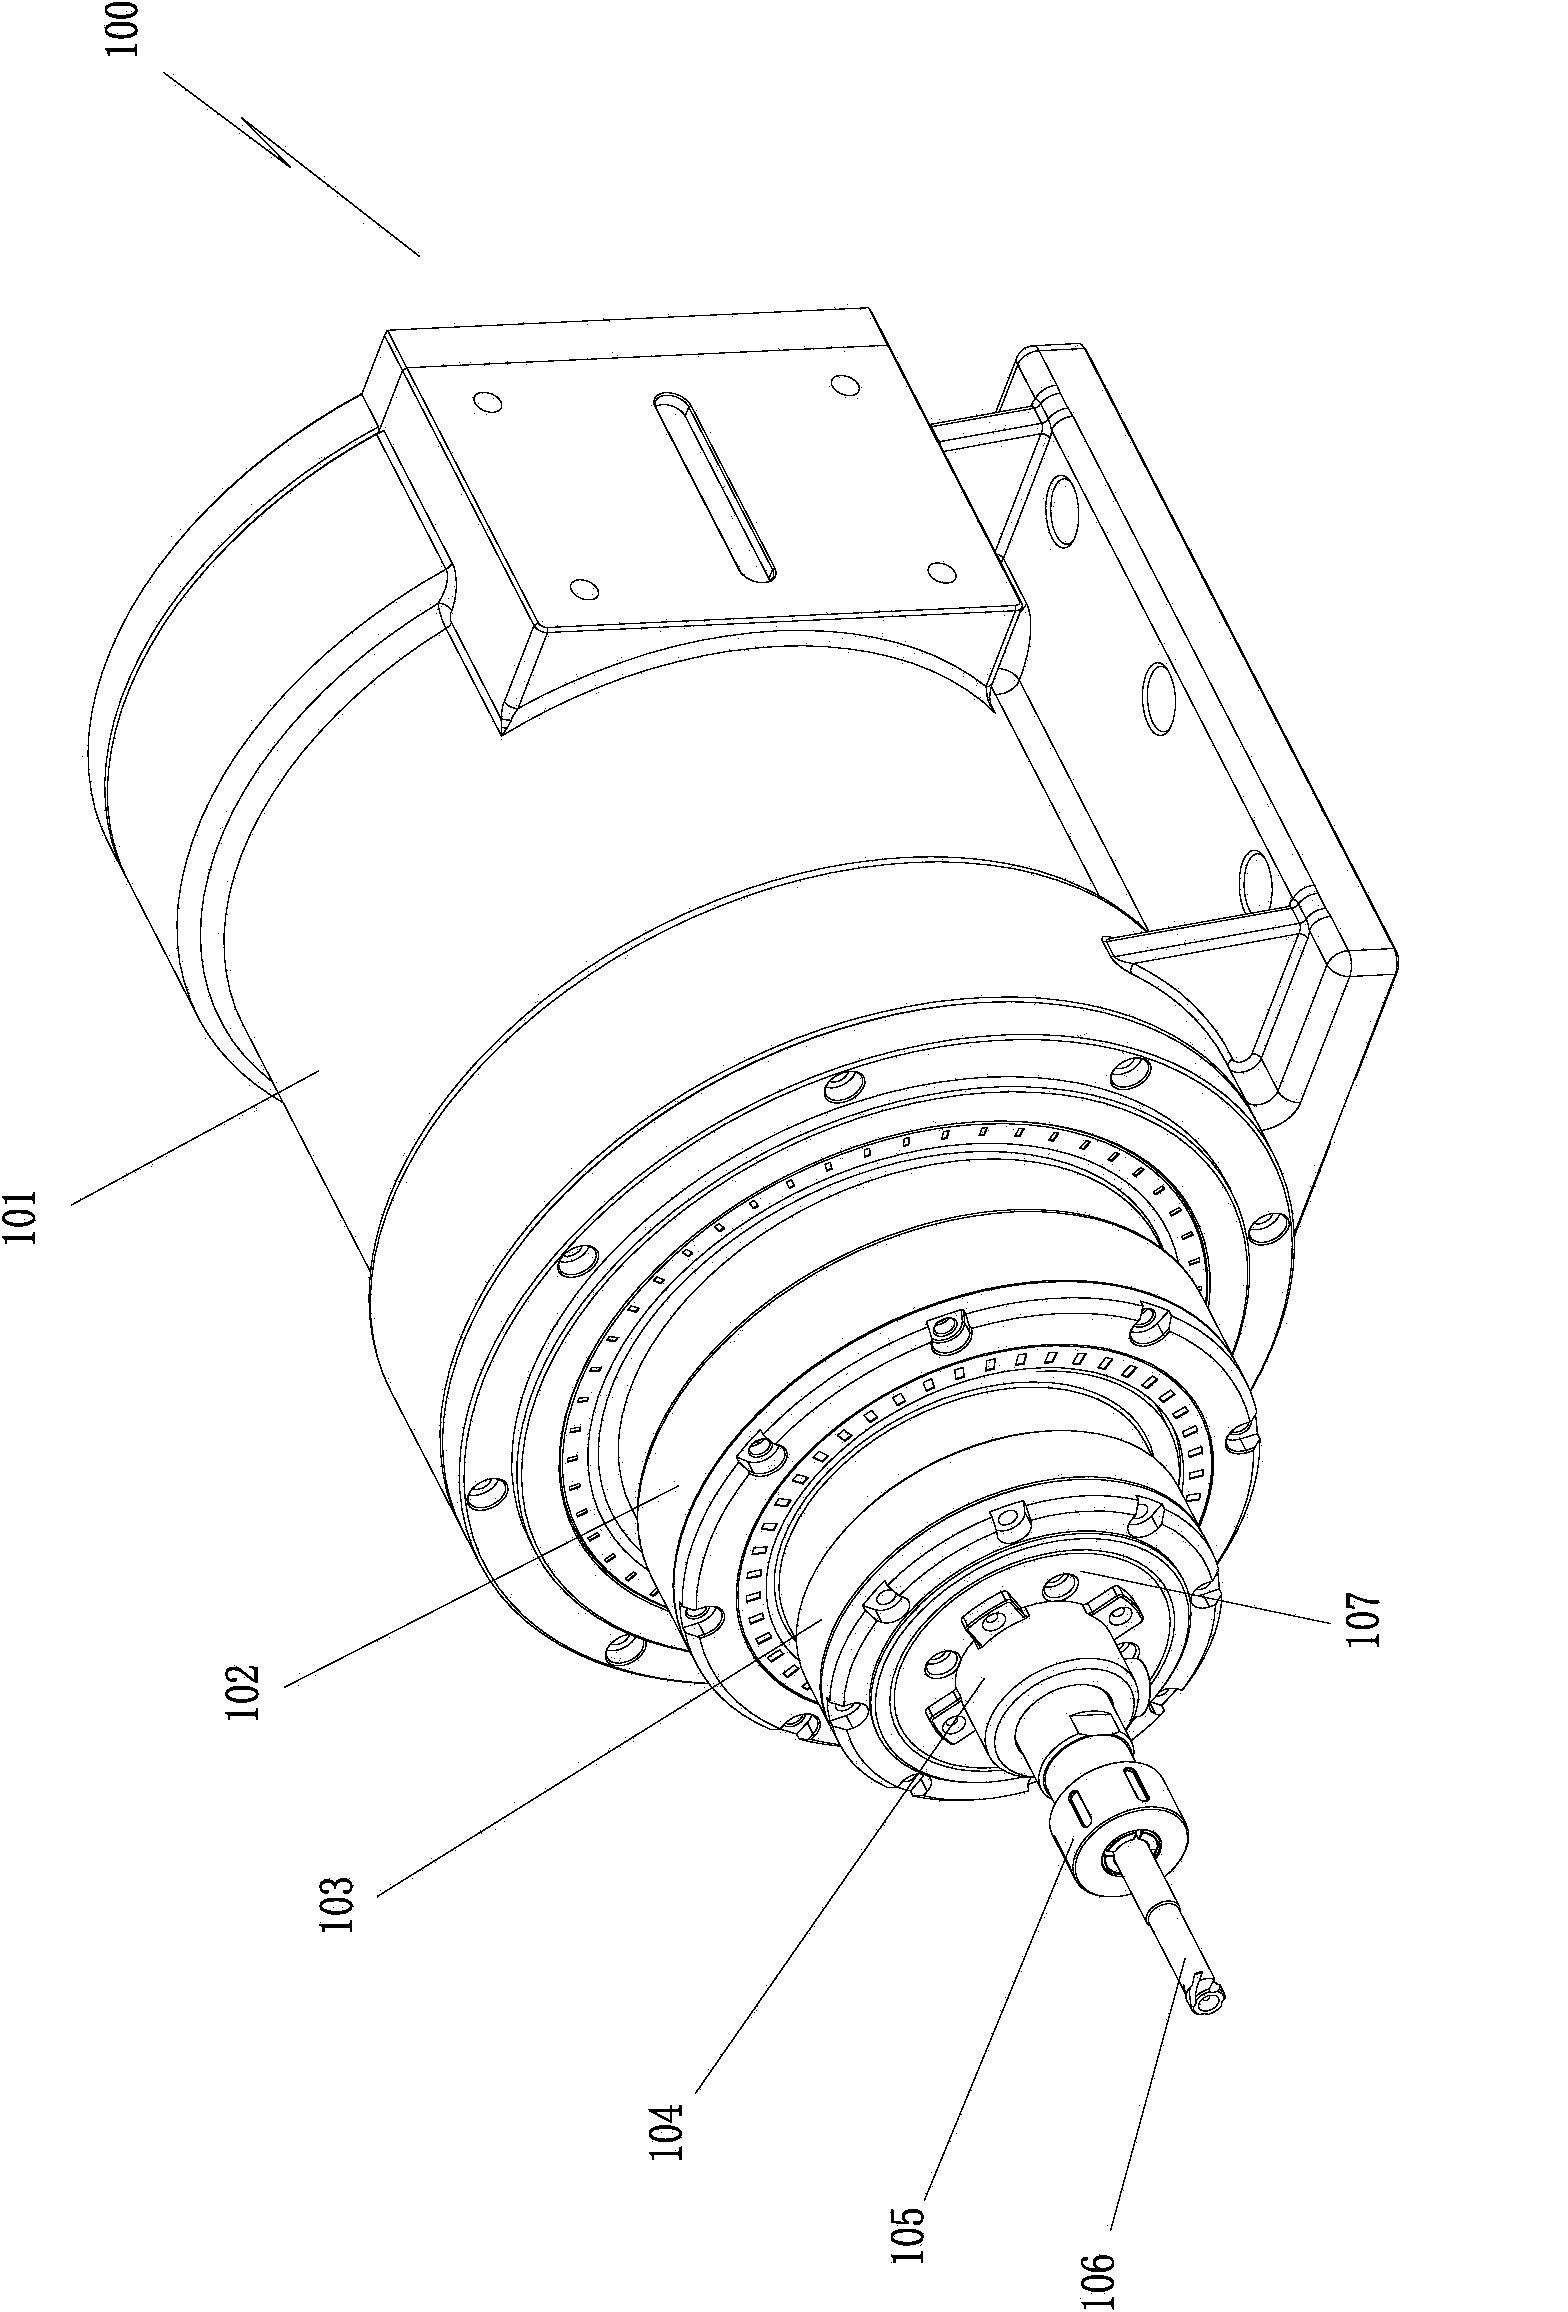 Hole forming device capable of adjusting aperture of formed hole on line